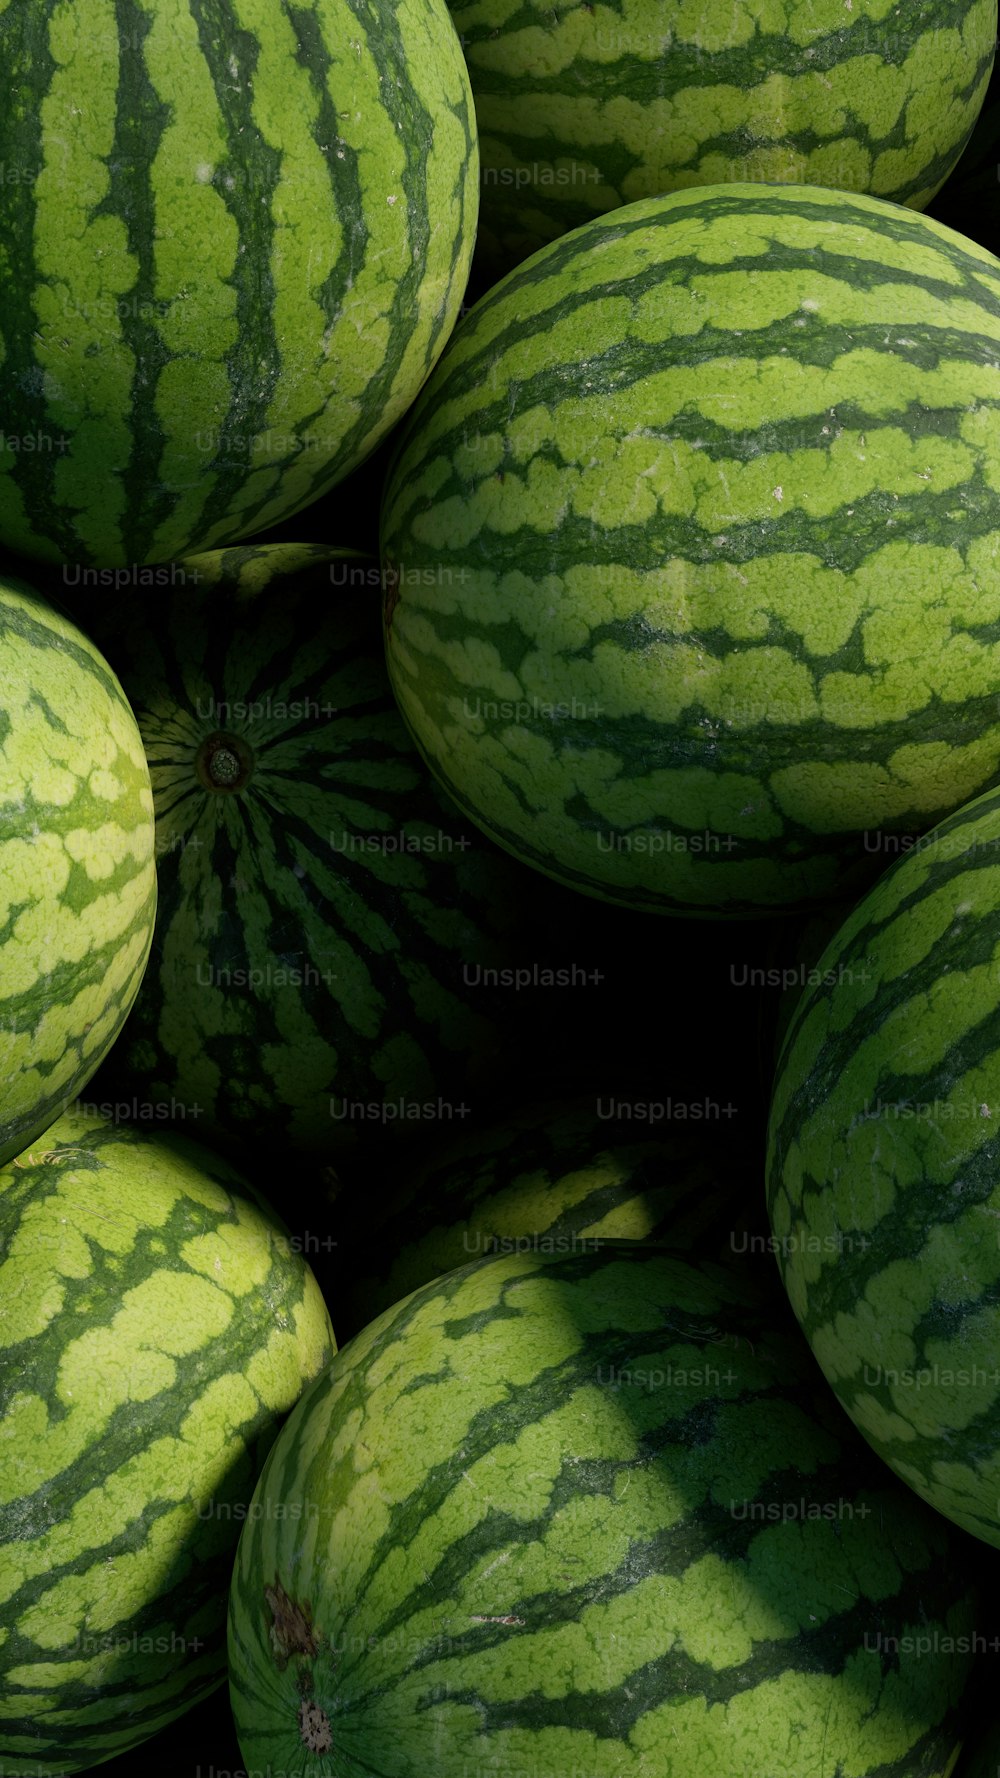 a pile of watermelons sitting next to each other